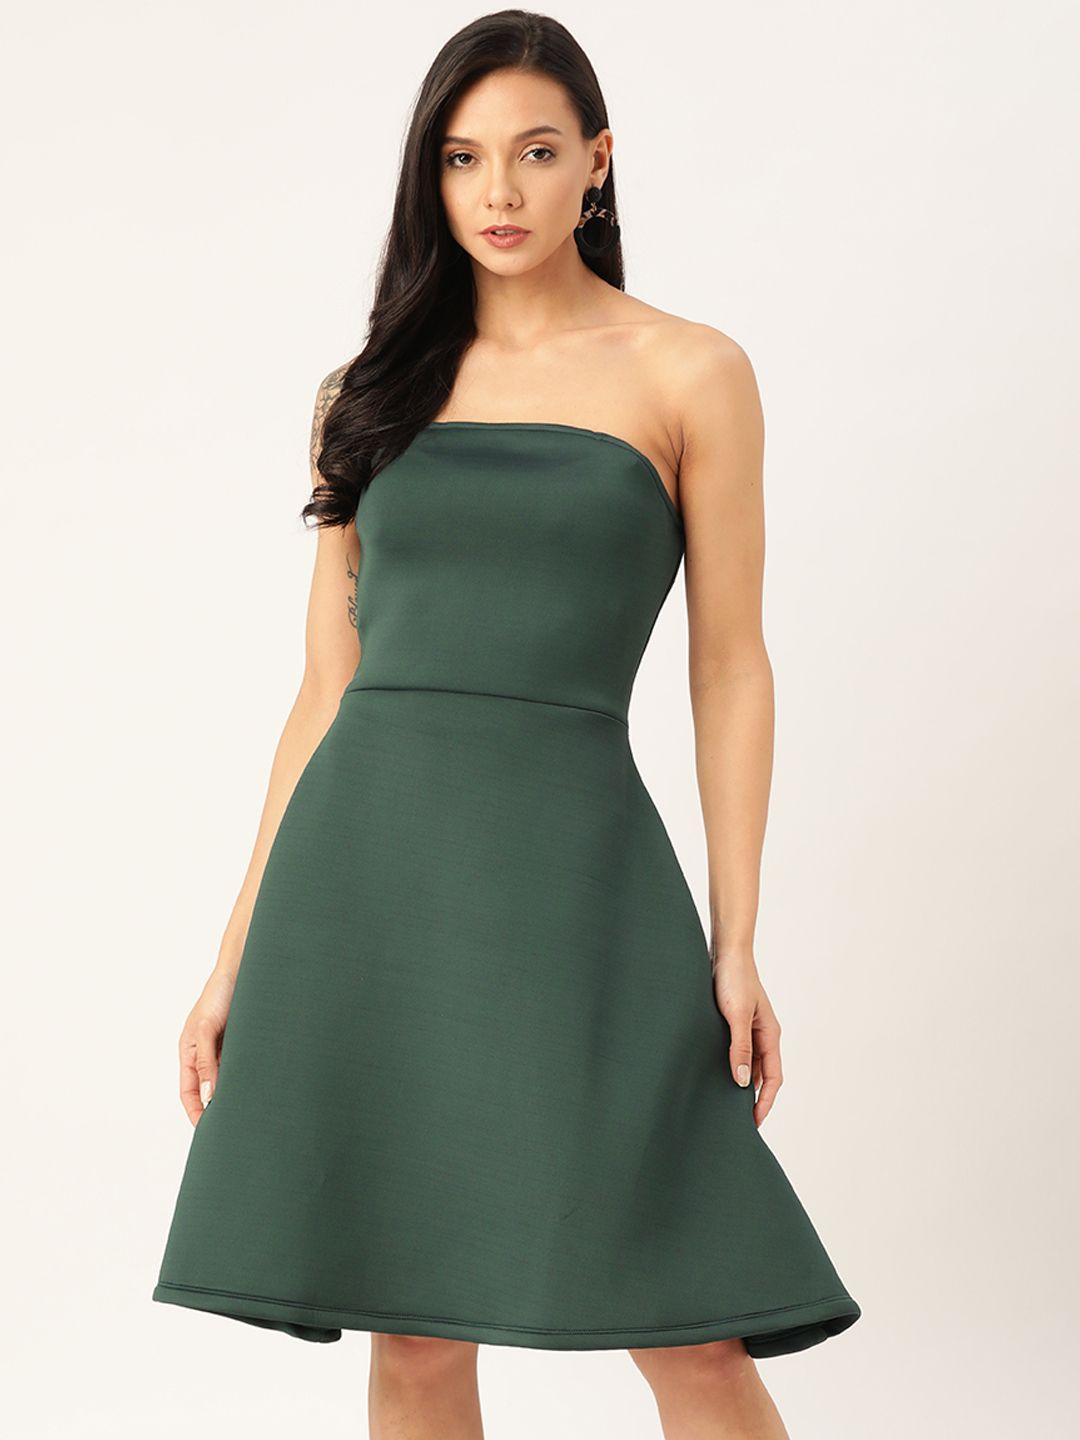 dodo-&-moa-women-teal-green-solid-off-shoulder-fit-and-flare-dress